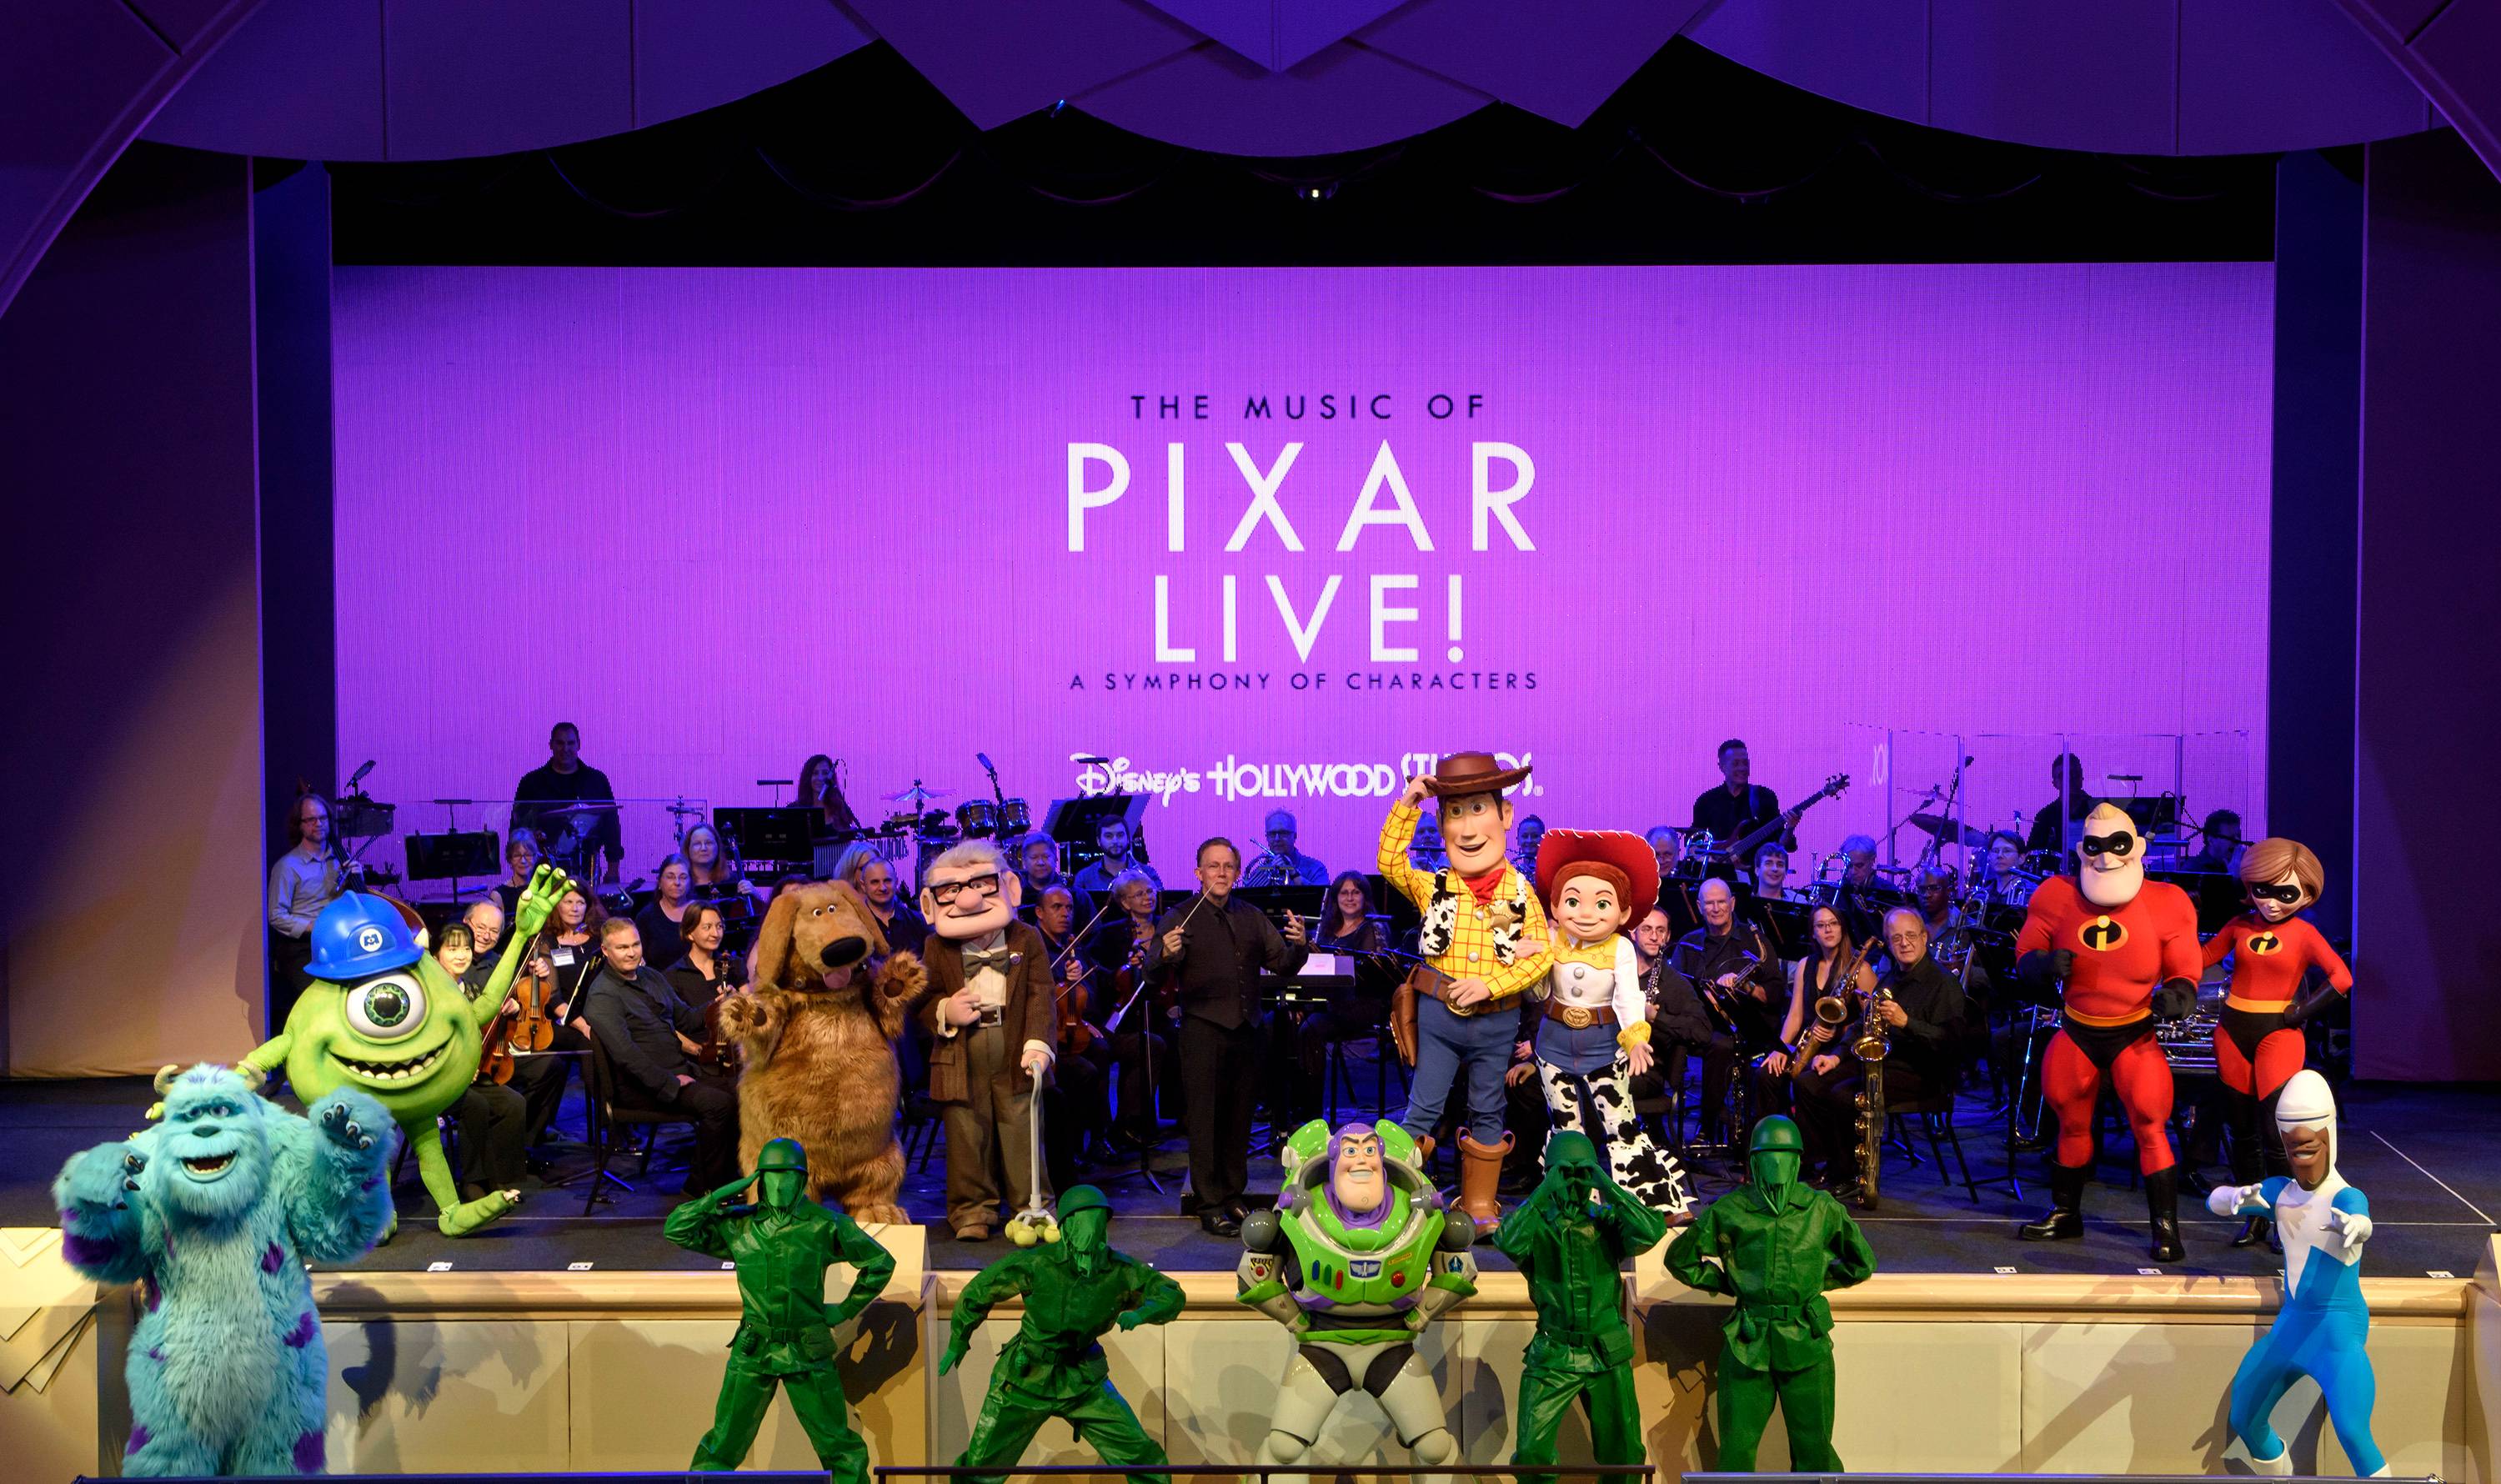 The Music of Pixar Live! overview